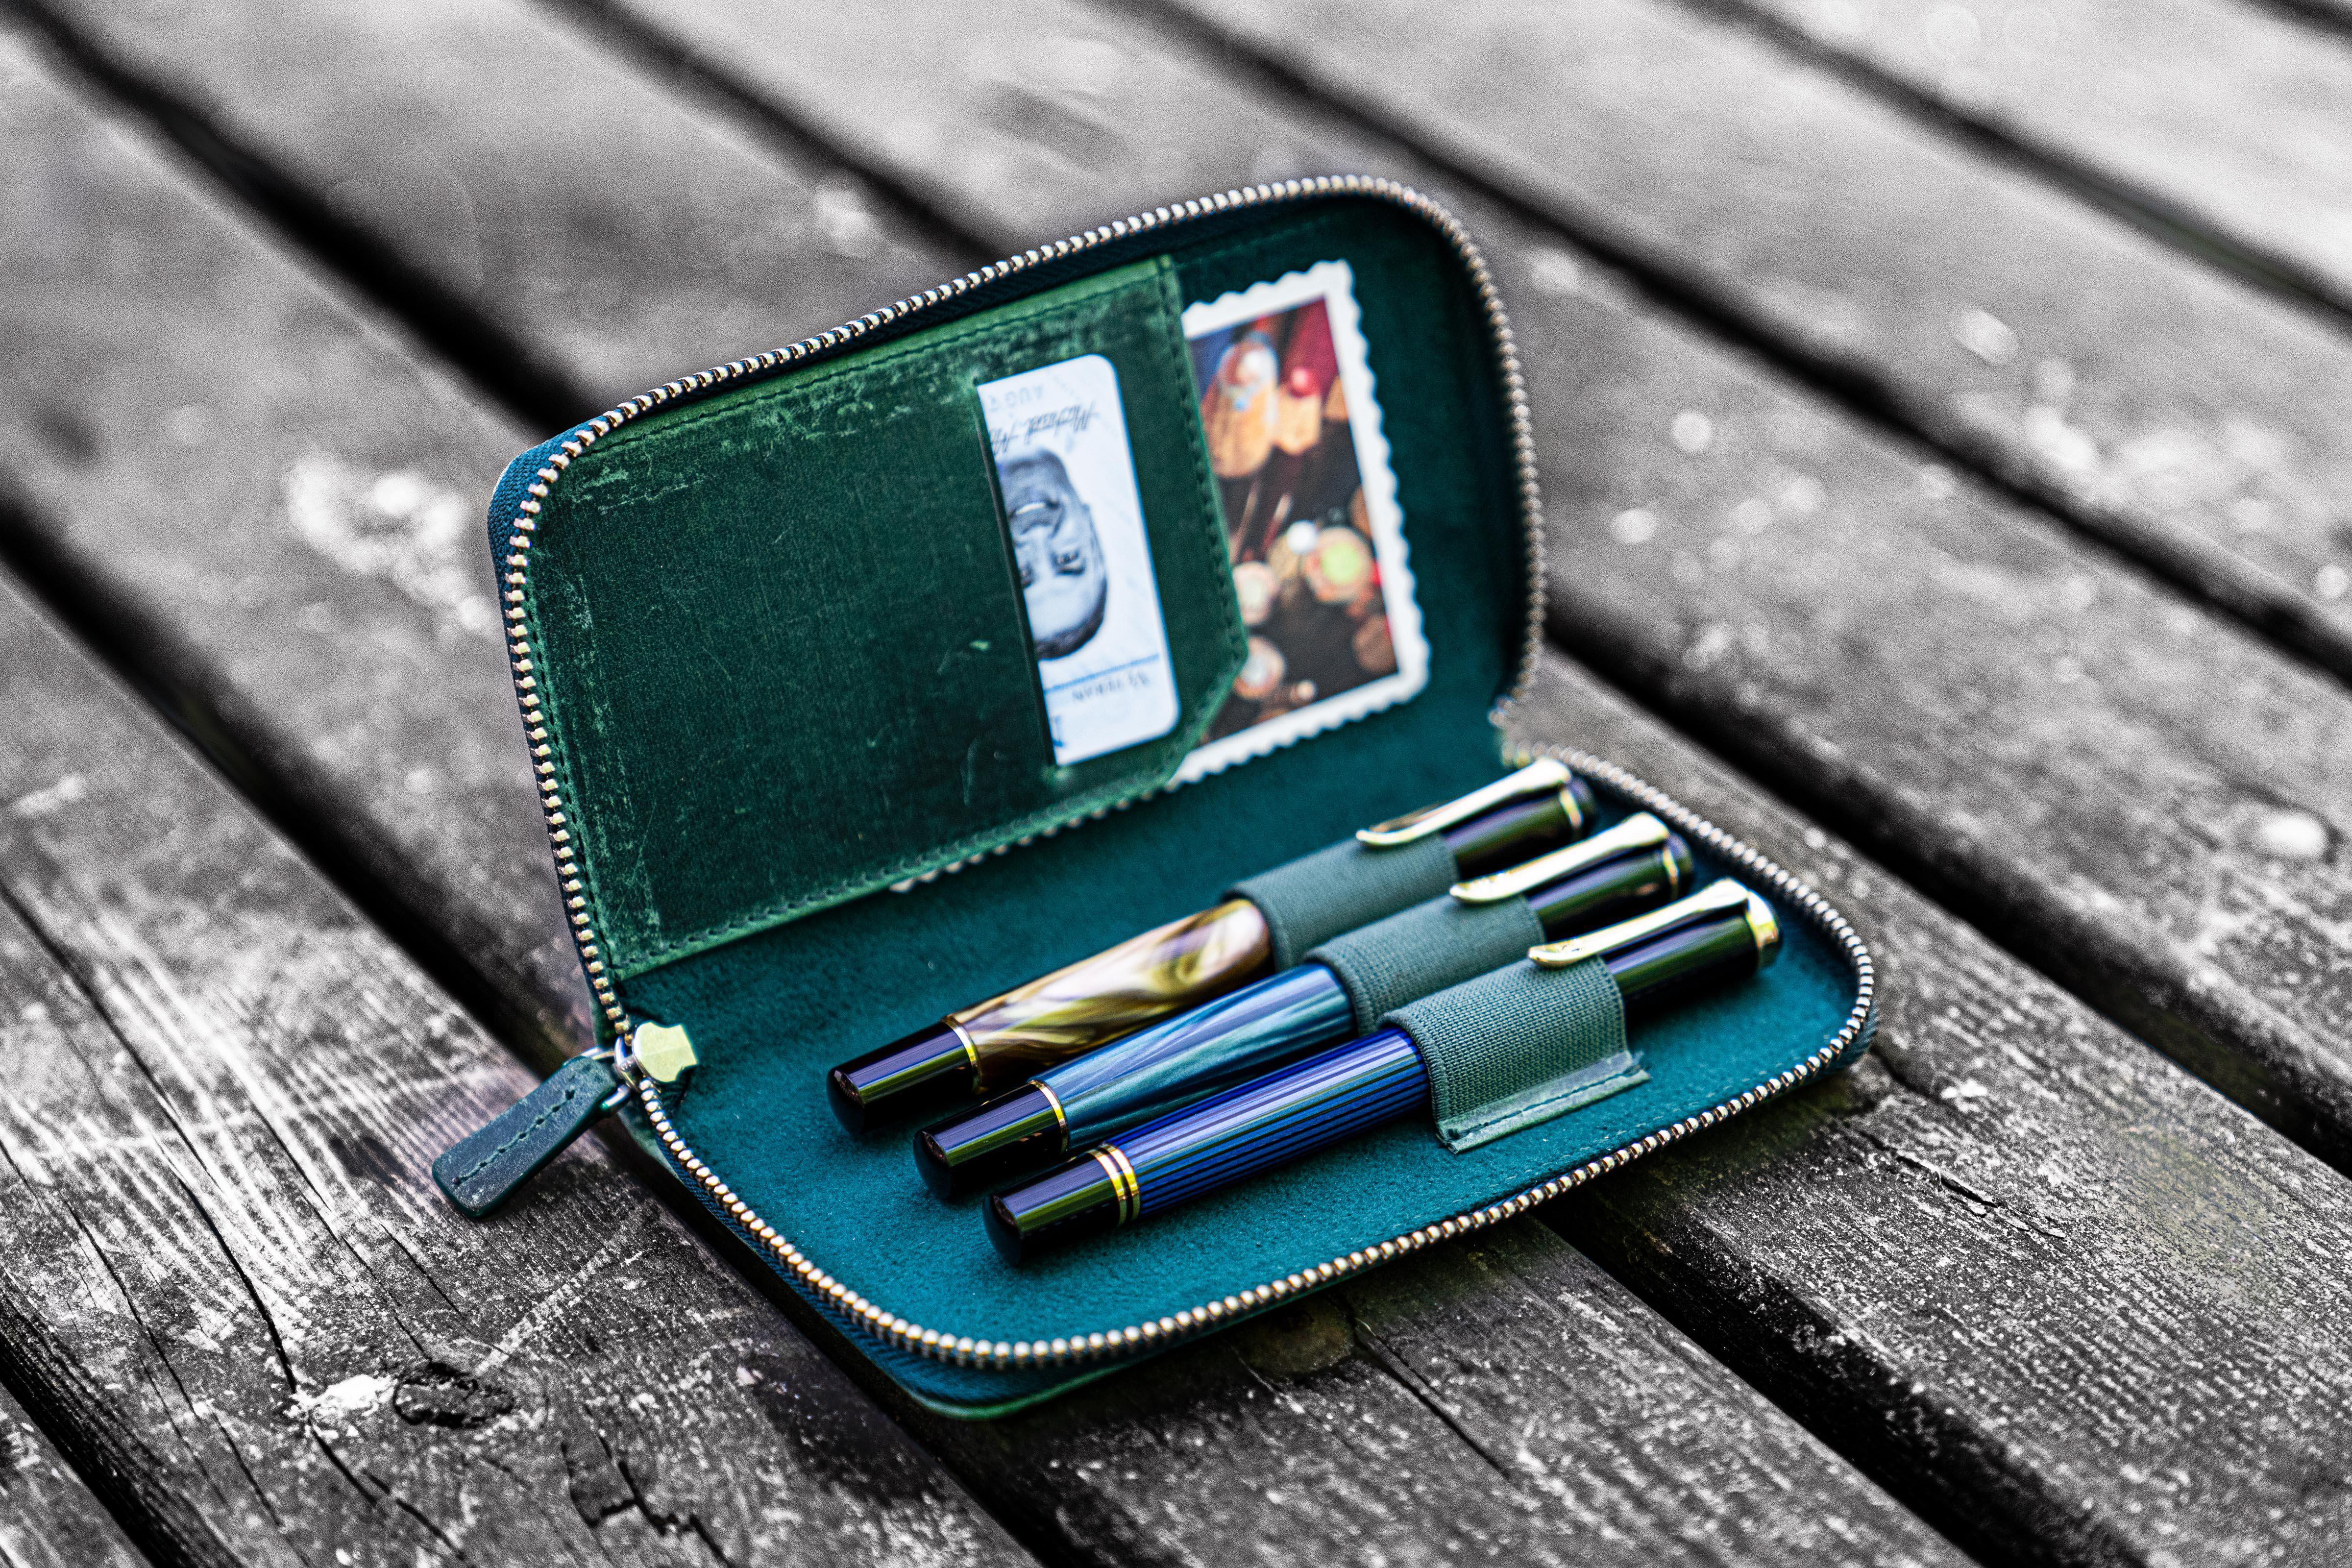 https://cdn.shopify.com/s/files/1/0575/7177/products/leather-zippered-3-slots-pen-case-crazy-horse-forest-green.jpg?v=1560008108